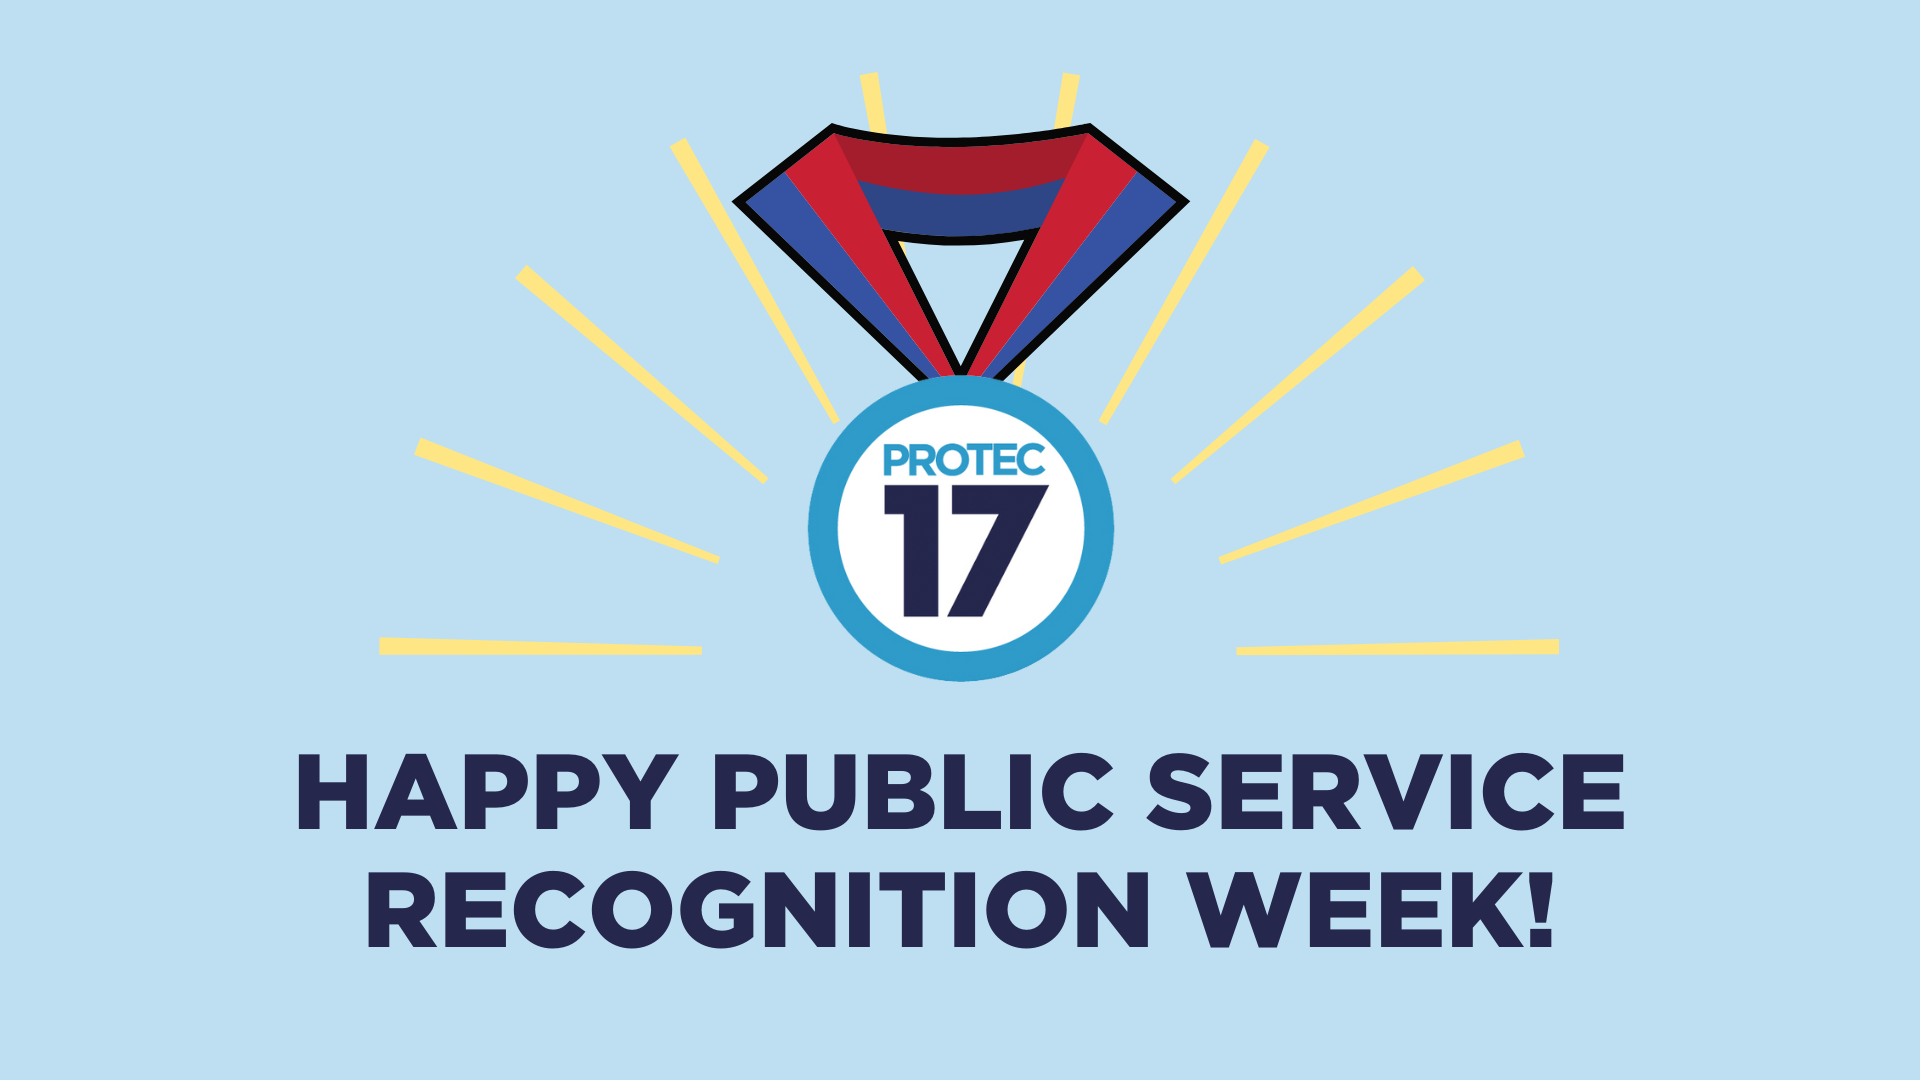 Text reads, "HAPPY PUBLIC SERVICE RECOGNITION WEEK! There is a medal with the PROTEC17 logo as the medal and light rays beaming from the medal.